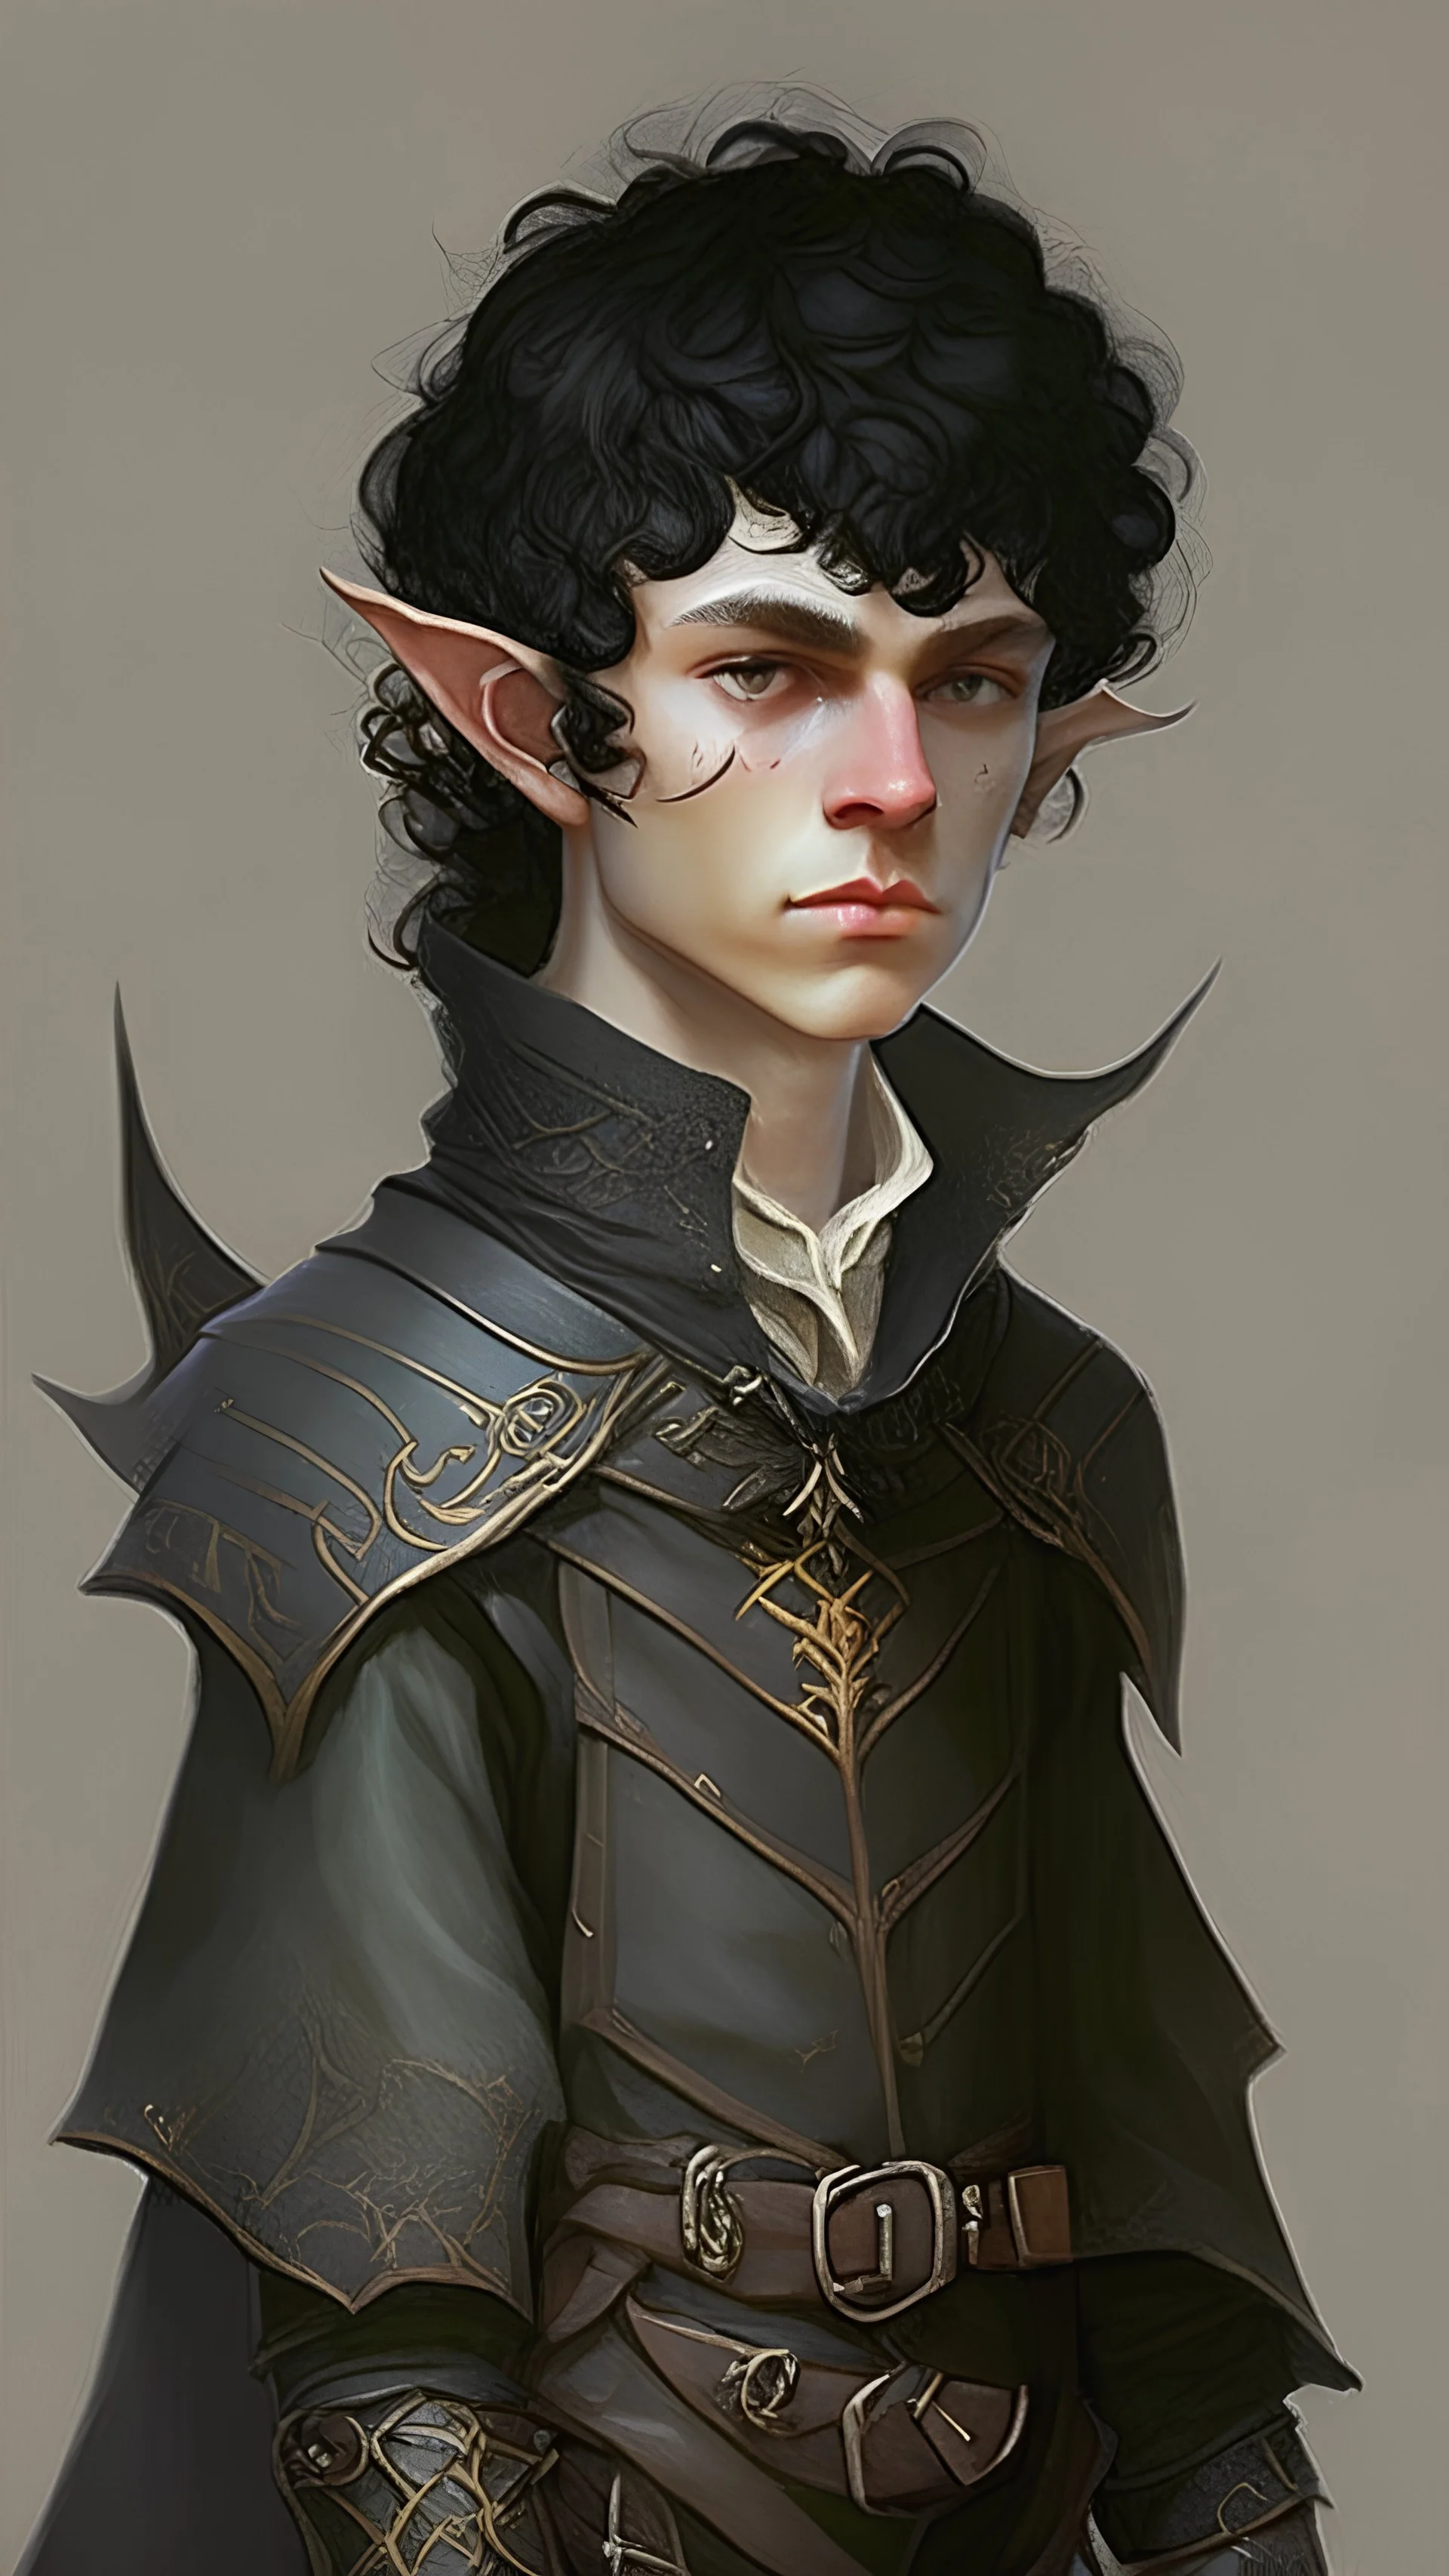 boy elf,he has curly, black hair and sharp cheekbones. His eyes are black. He wears fantasy medieval clothes. he is lean and tall, with pale skin, full body with boots, side view